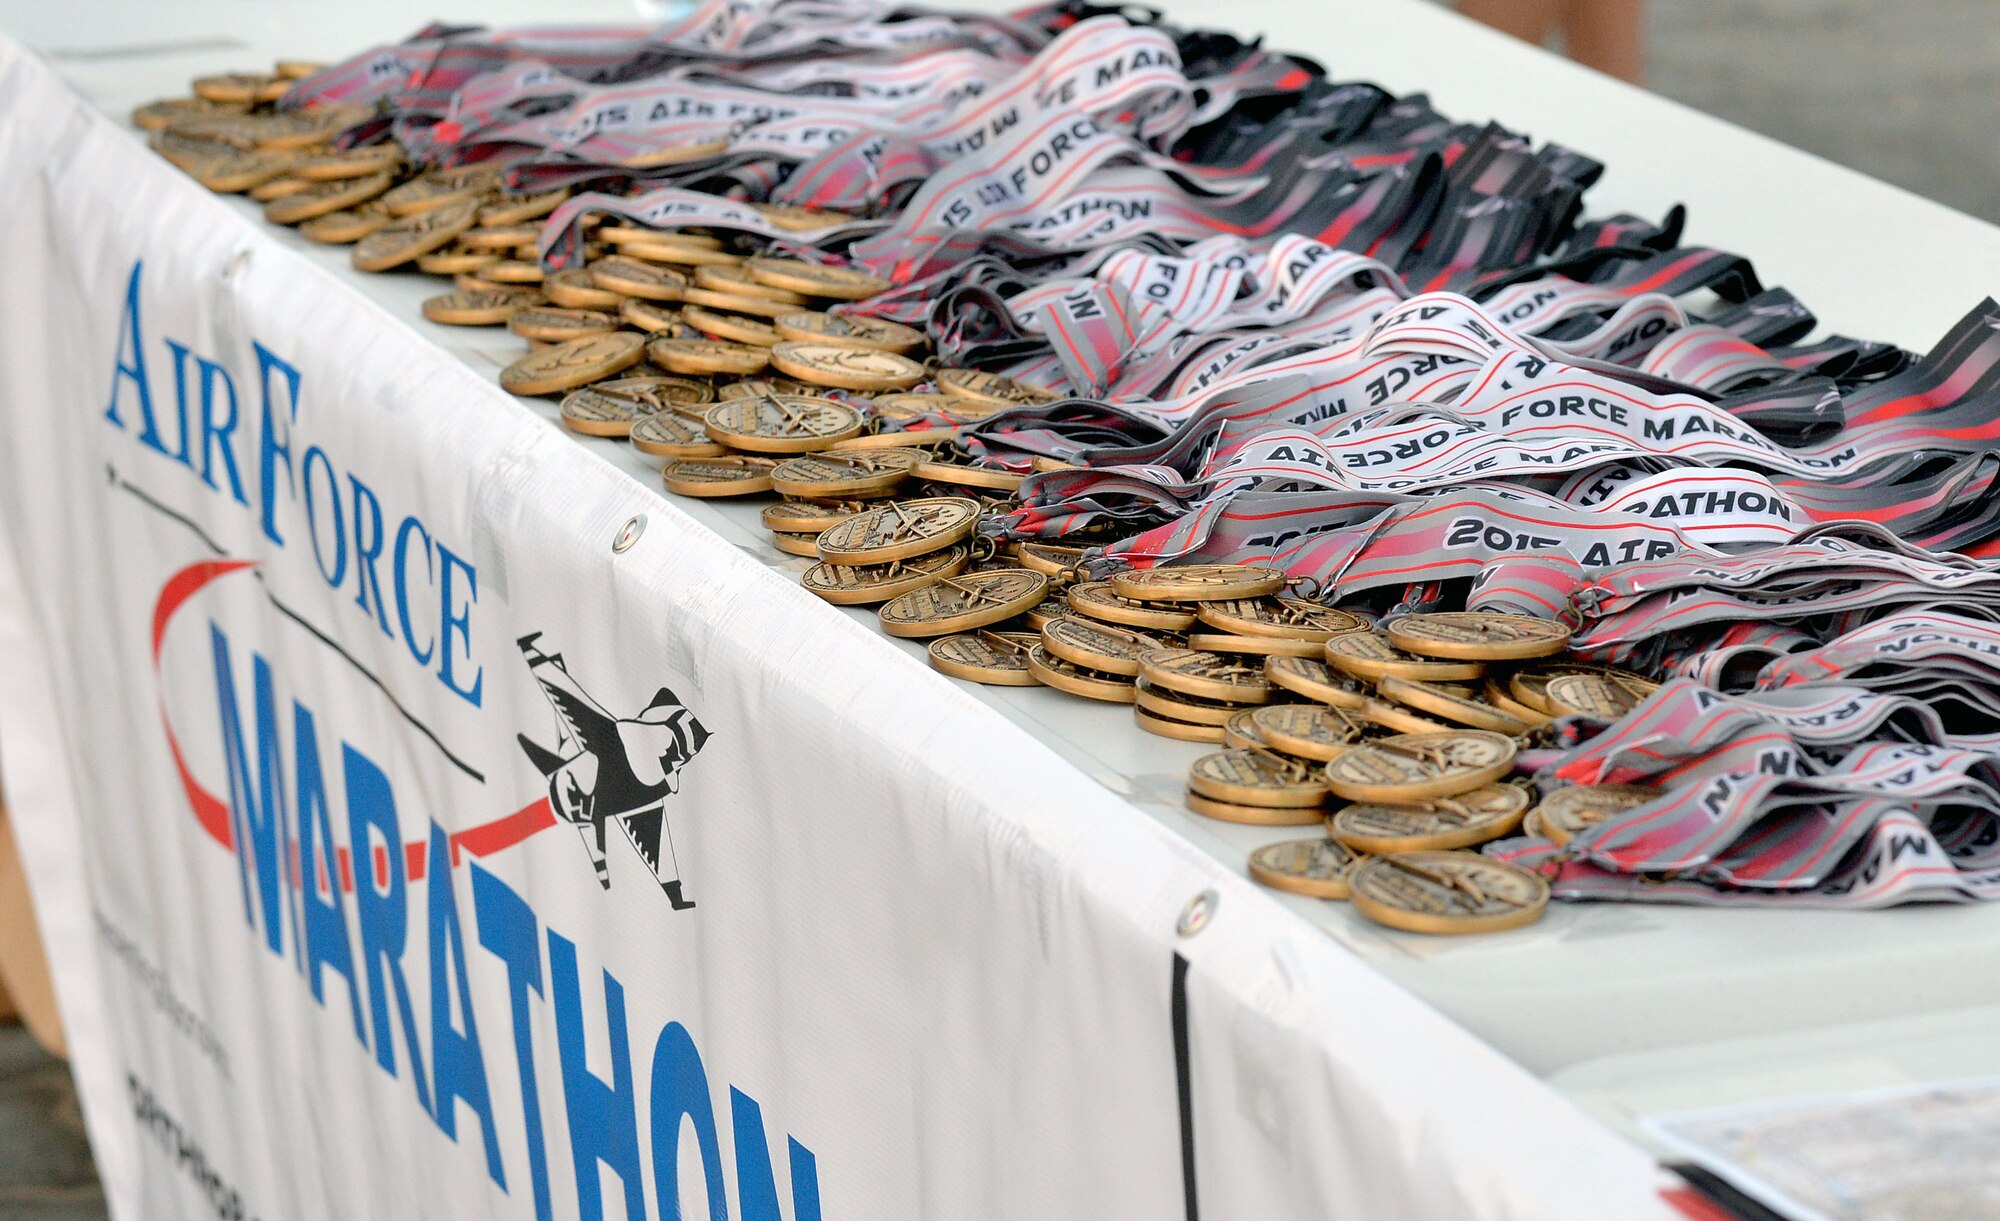 Air Force marathon medals sit on a table at undisclosed location in Southwest Asia Sept. 19, 2015. The medals were presented to participants upon completion of the run.  (U.S. Air Force photo/Tech. Sgt. Jeff Andrejcik)